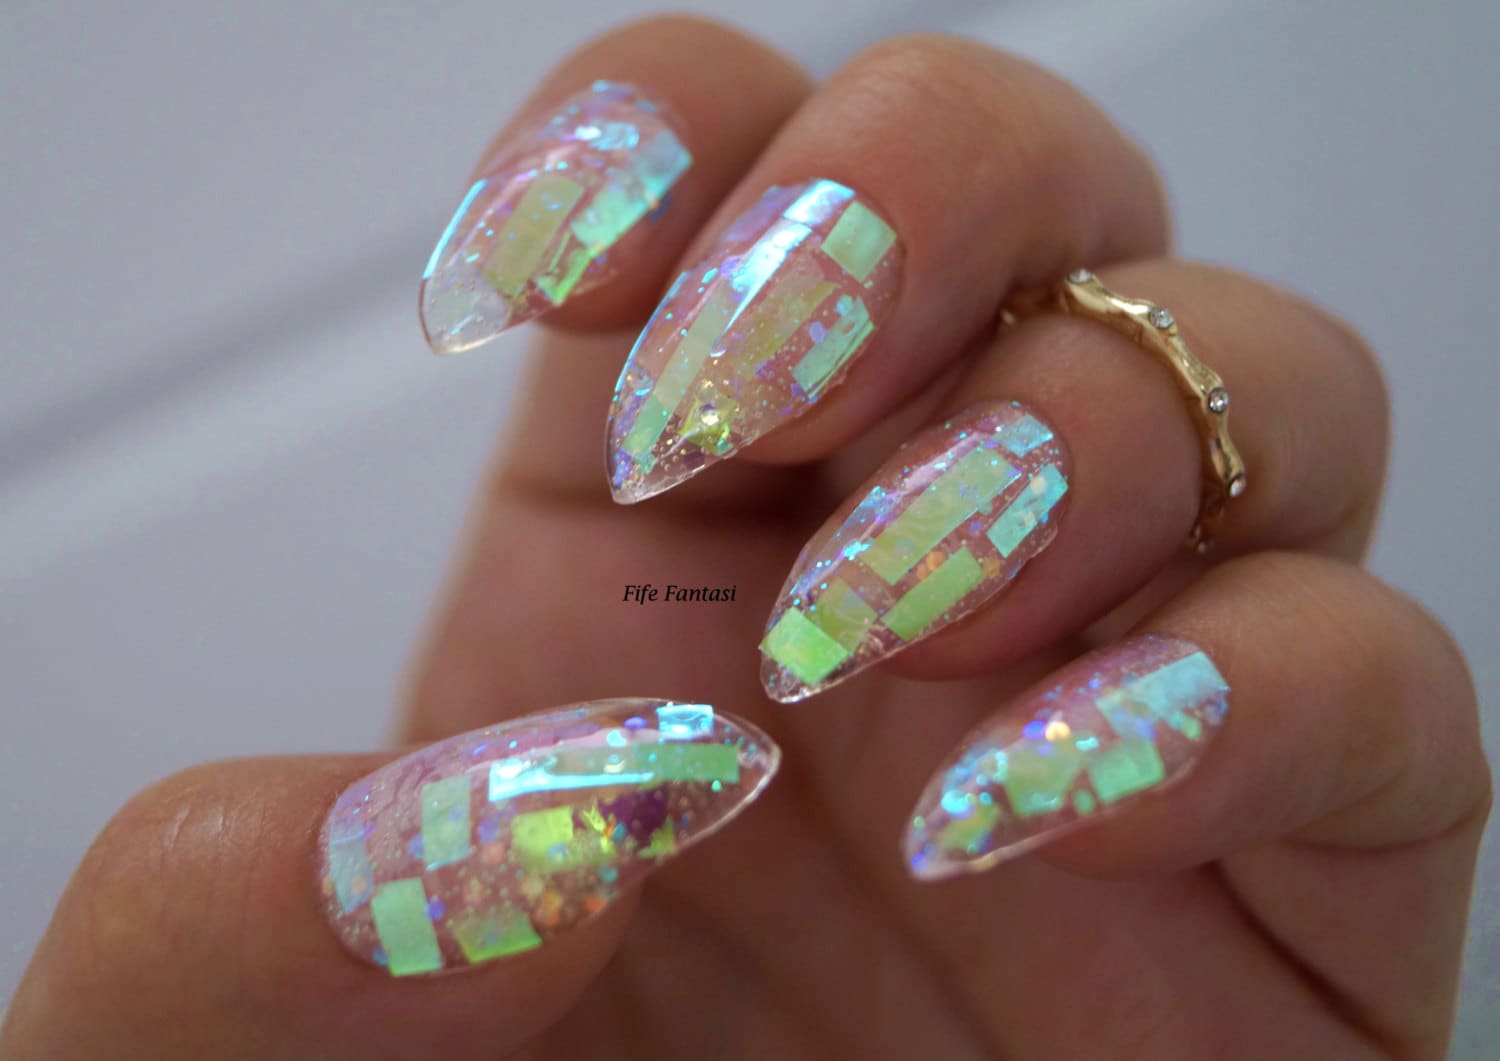 1. "Glass nails: The latest trend in nail art" - wide 7